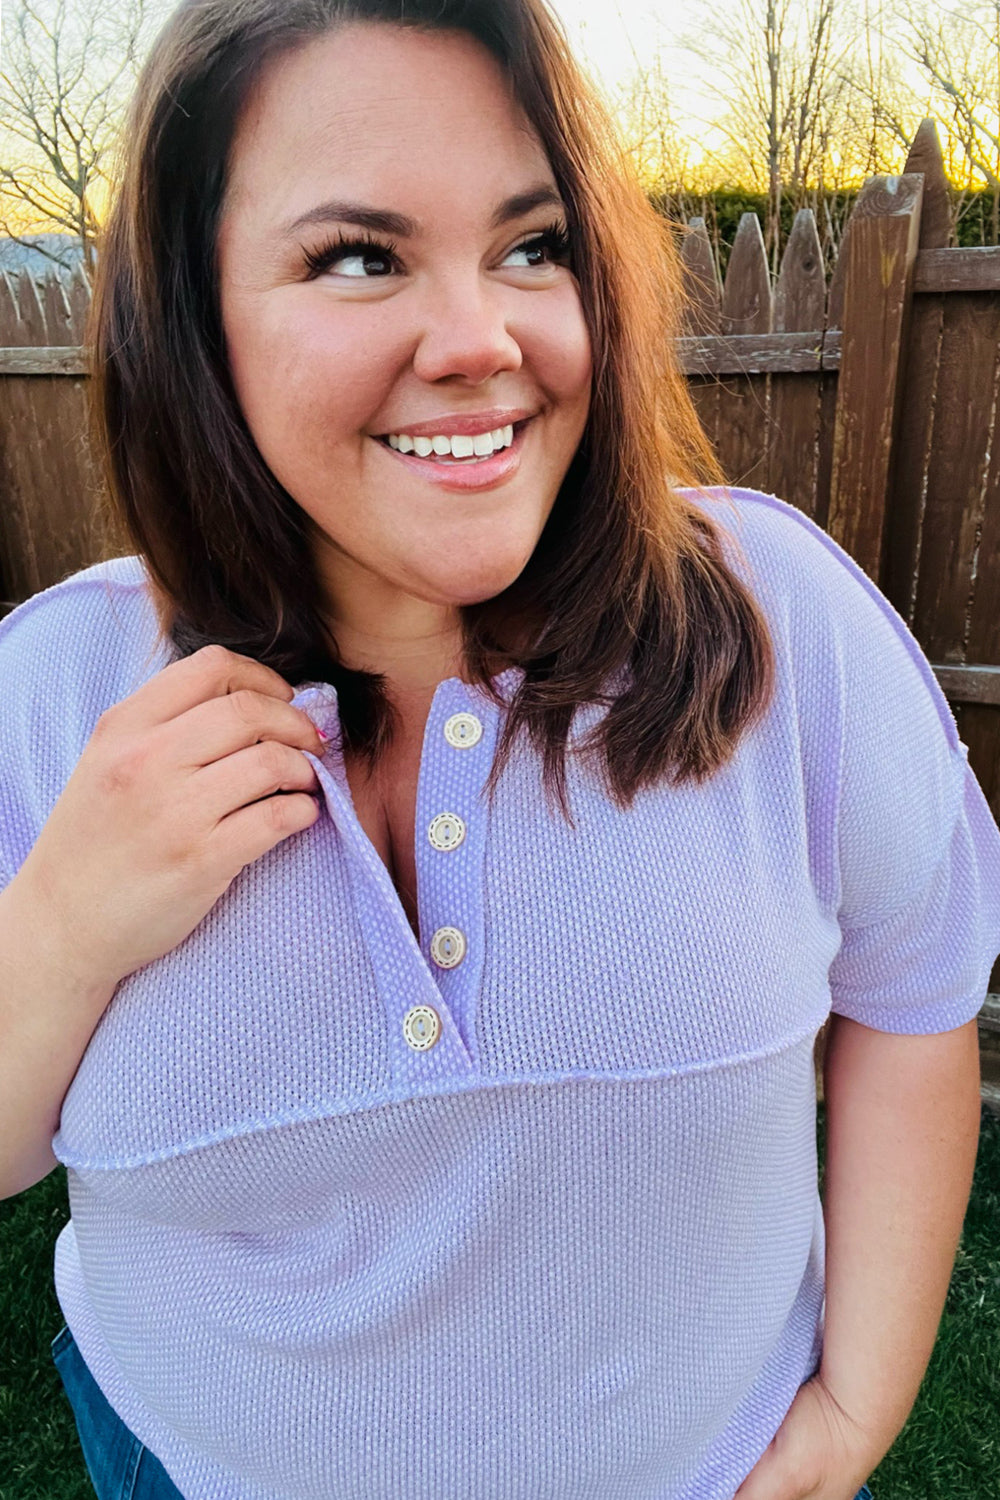 Lilac Knit Outseam Top